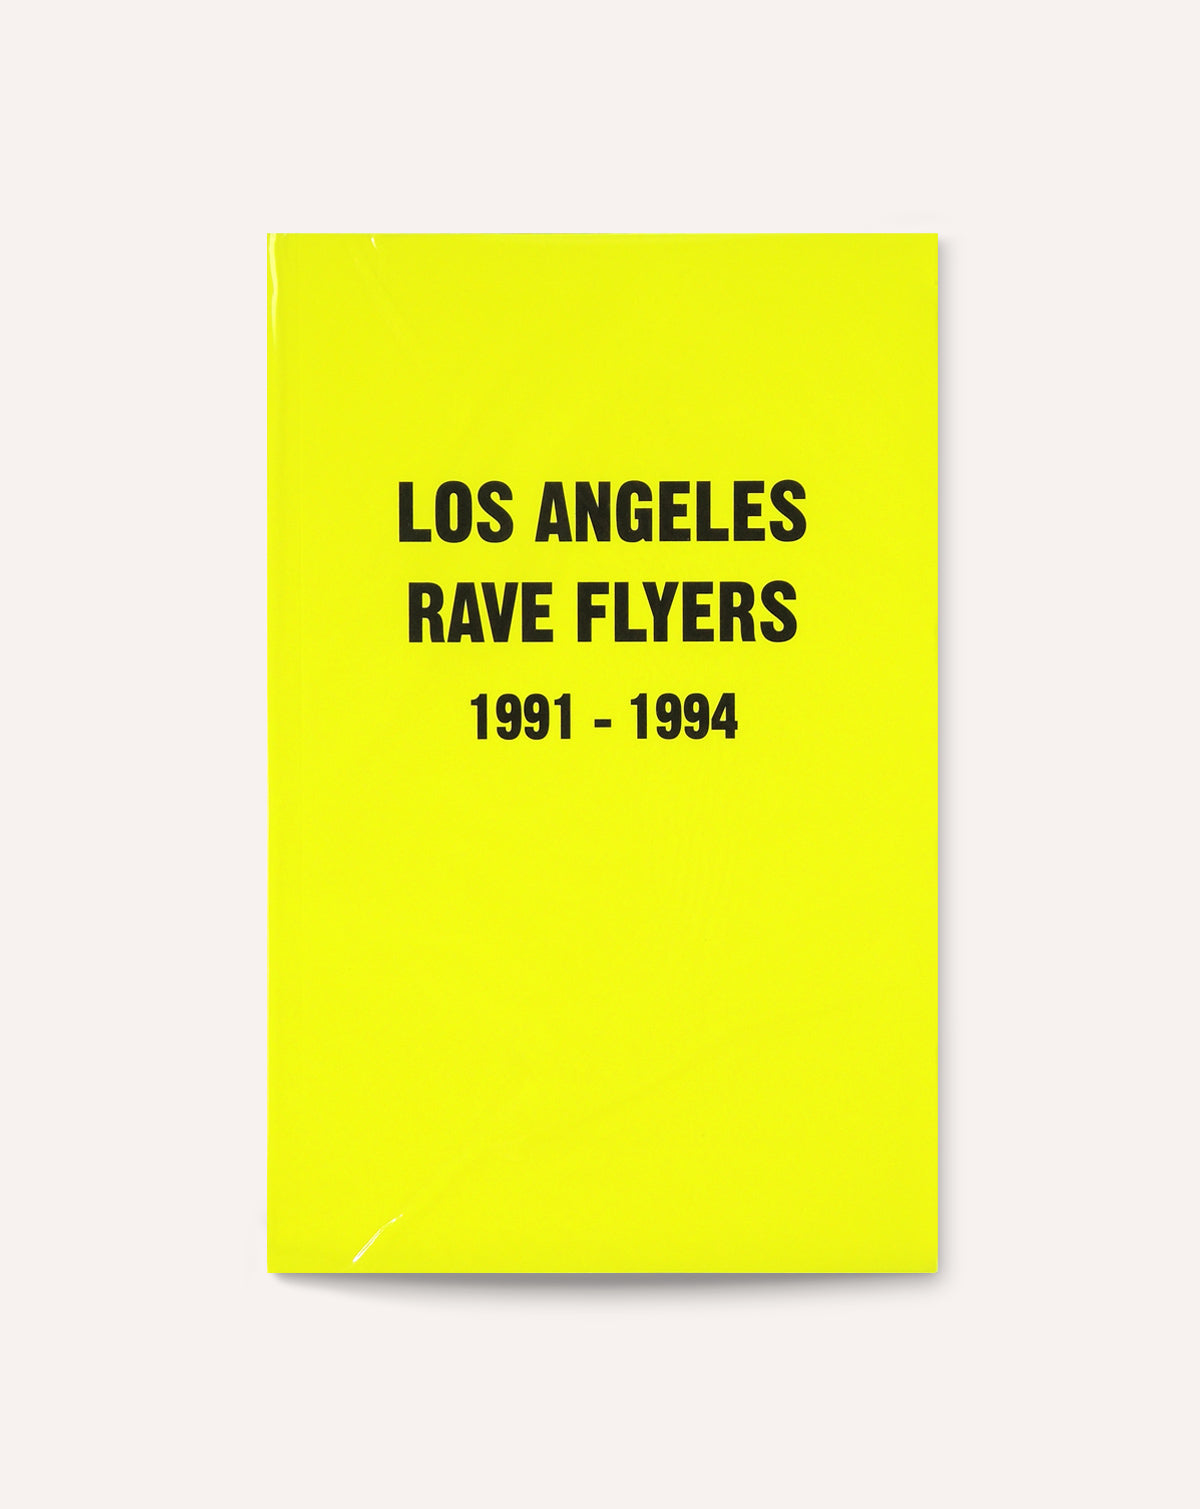 Los Angeles Rave Flyers, 1991-1994